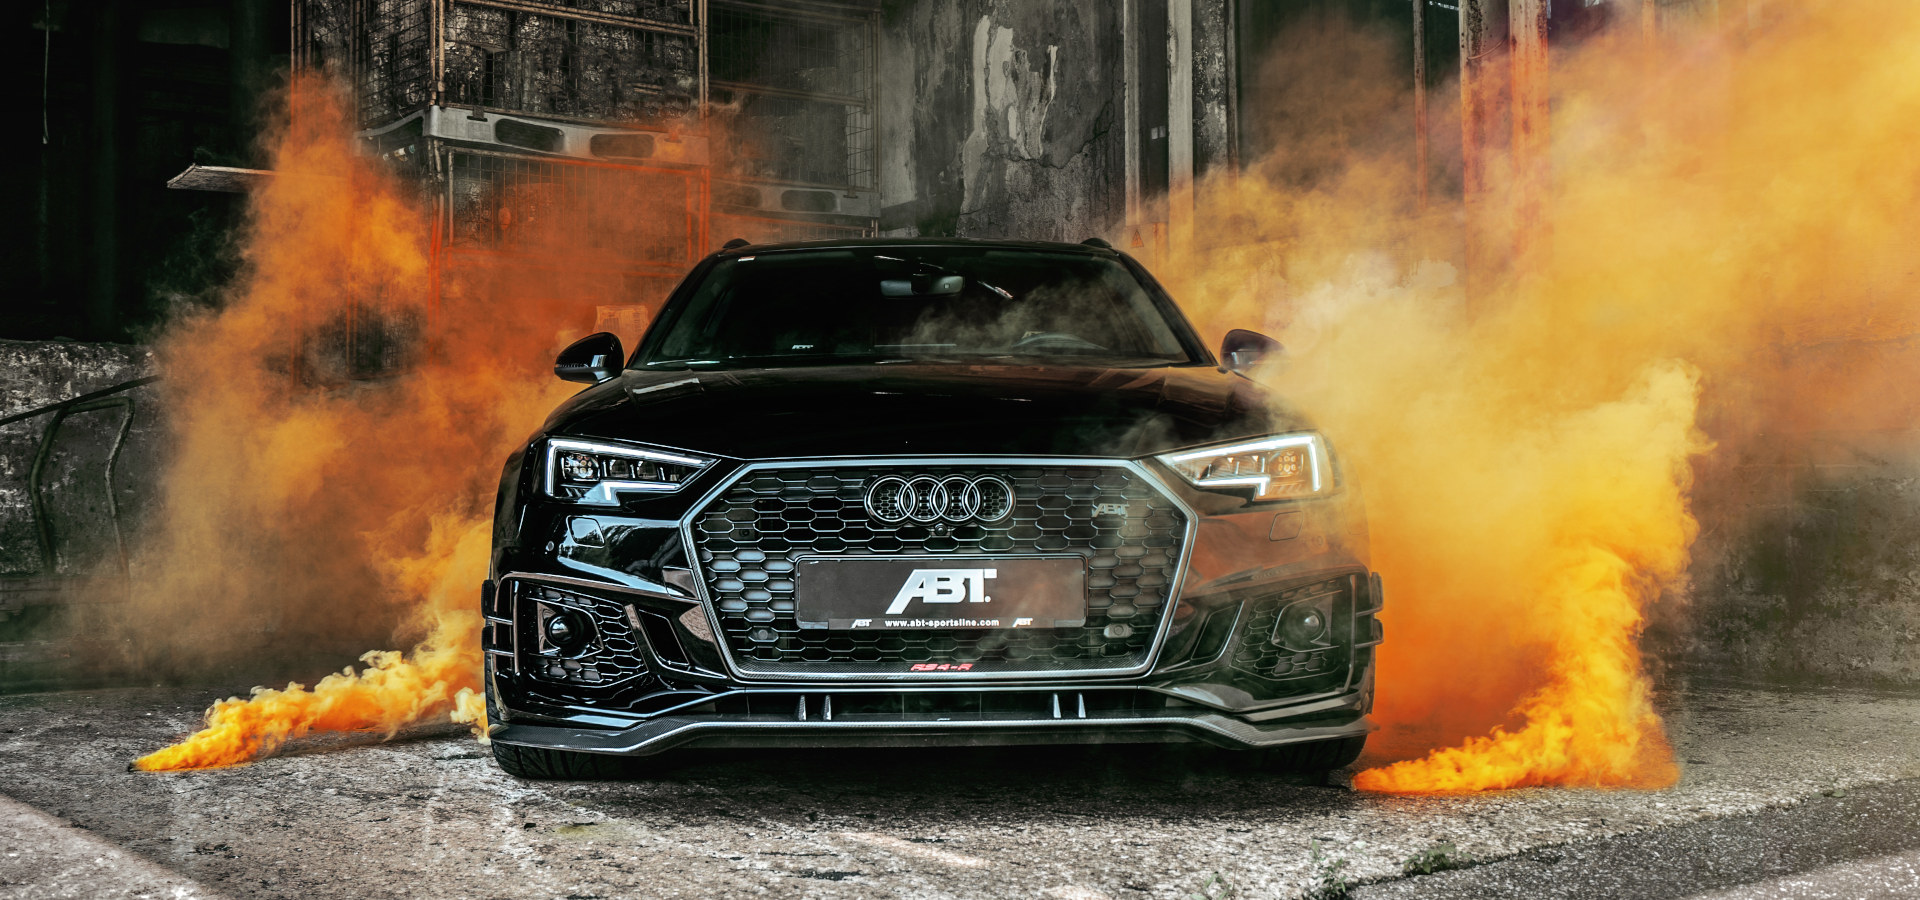 About us - Audi Tuning, VW Tuning, Chiptuning von ABT Sportsline.